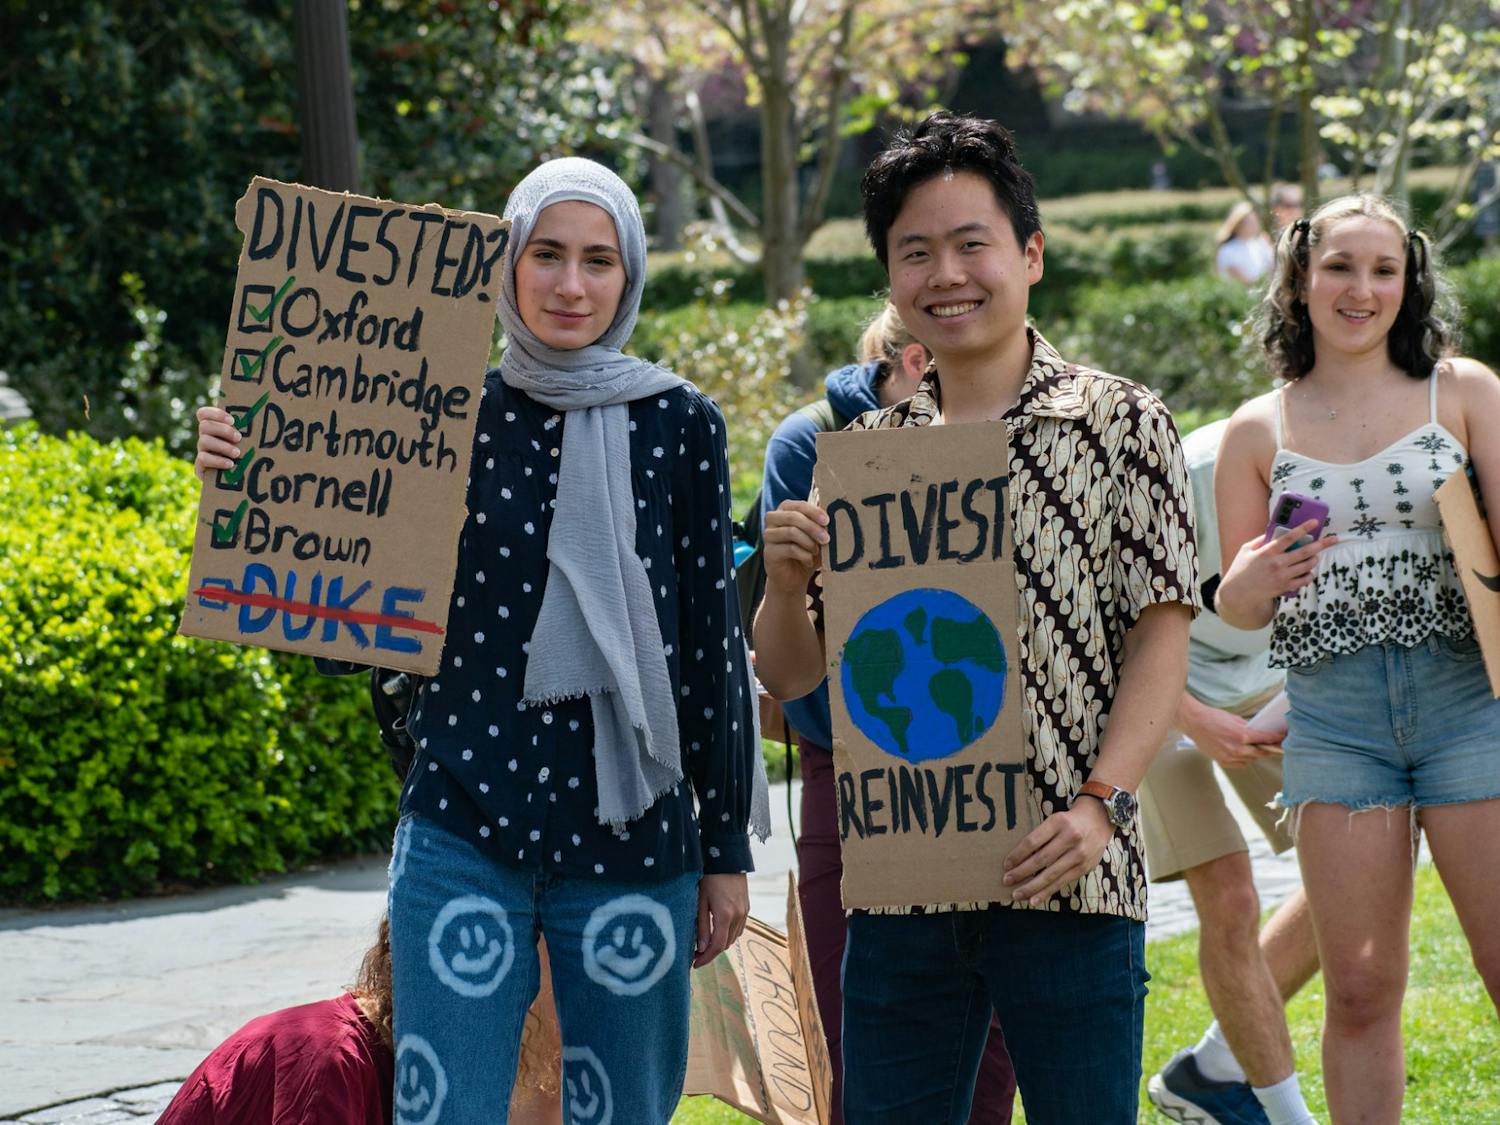 Students and supporters gathered to demand that Duke divest from fossil fuels, following a recent referendum overwhelmingly in favor of divestment, on April 6, 2022.&nbsp;